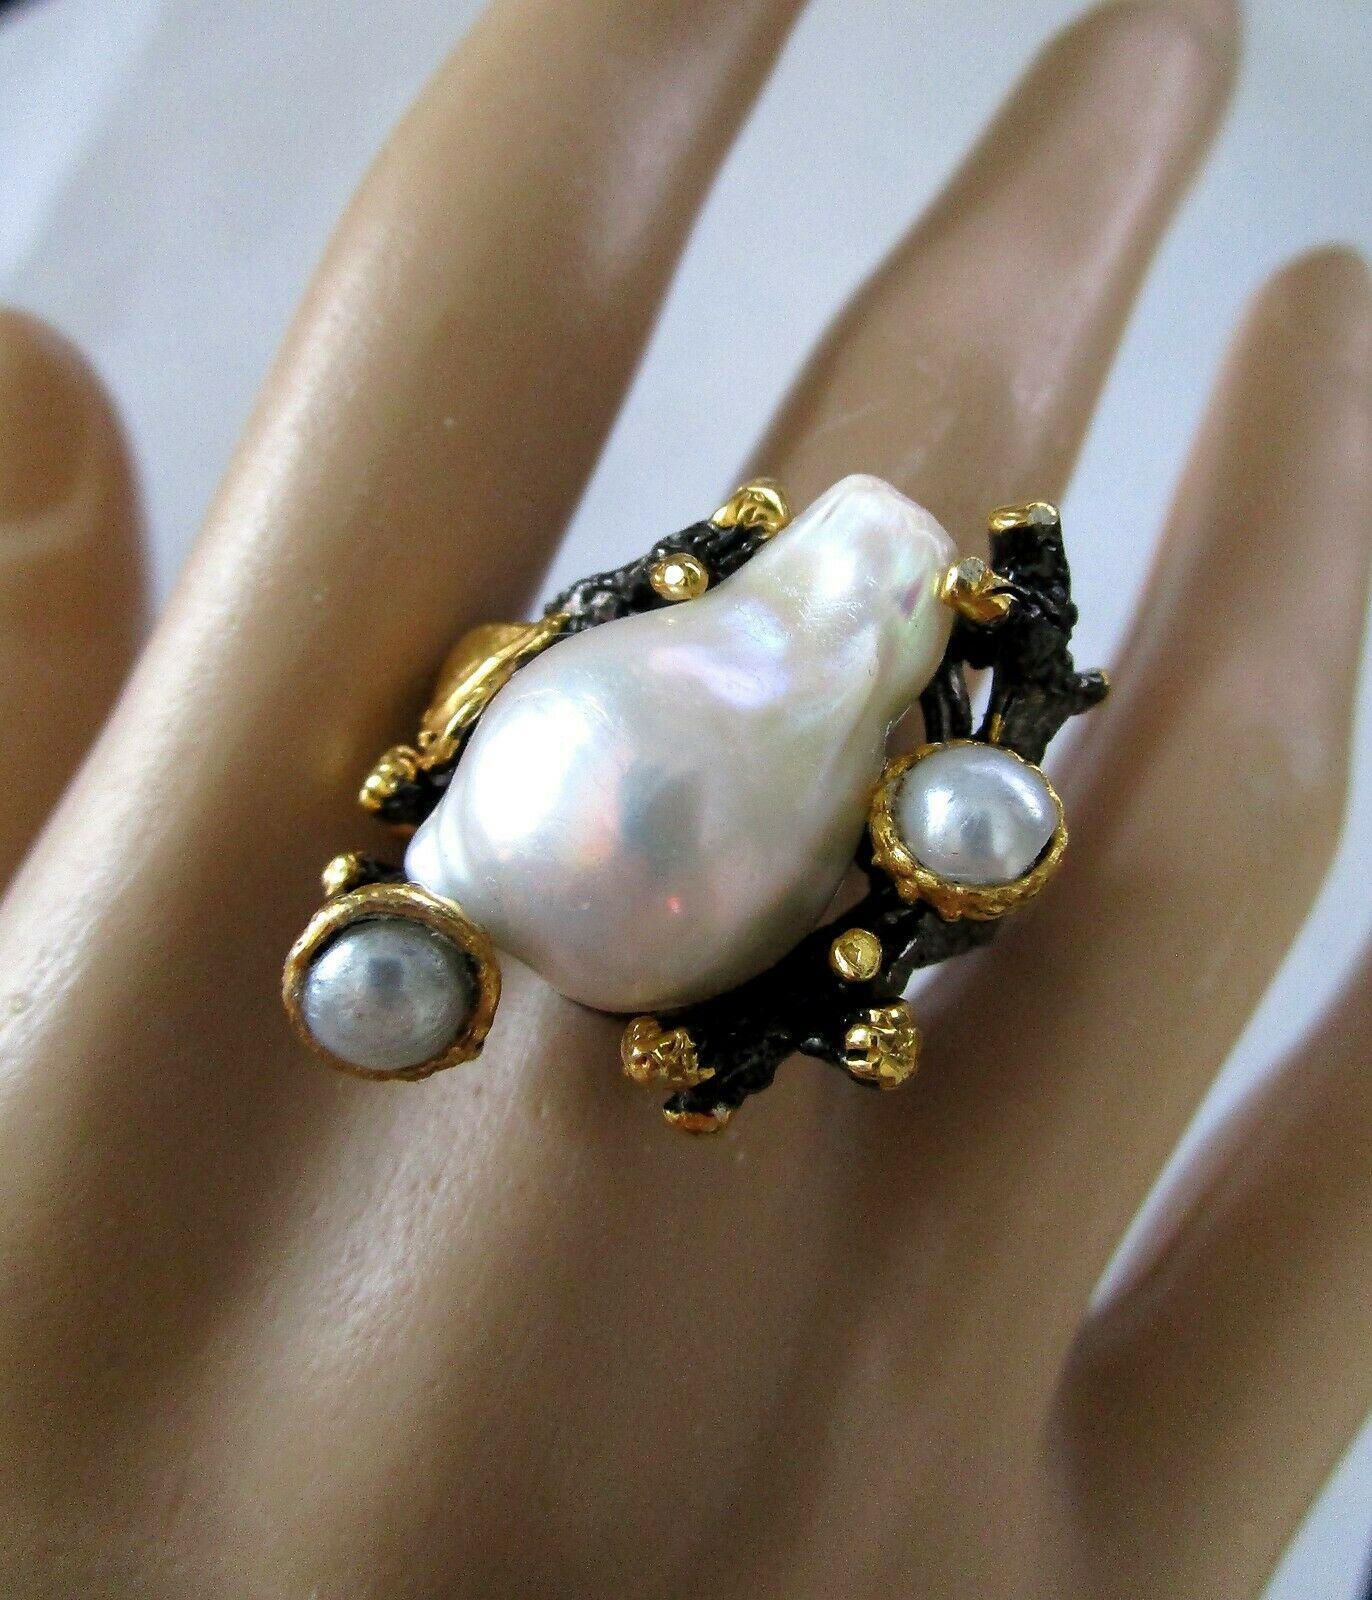 Ourstanding Abstract Artisan Ring, Hand crafted in Oxidized Sterling Silver with 18K Gold plated stylized leaves and branches. Center Hand set with a large Baroque Genuine Pearl and accent Pearls in surround. Marked: 925. Size 8. Sure to be admired